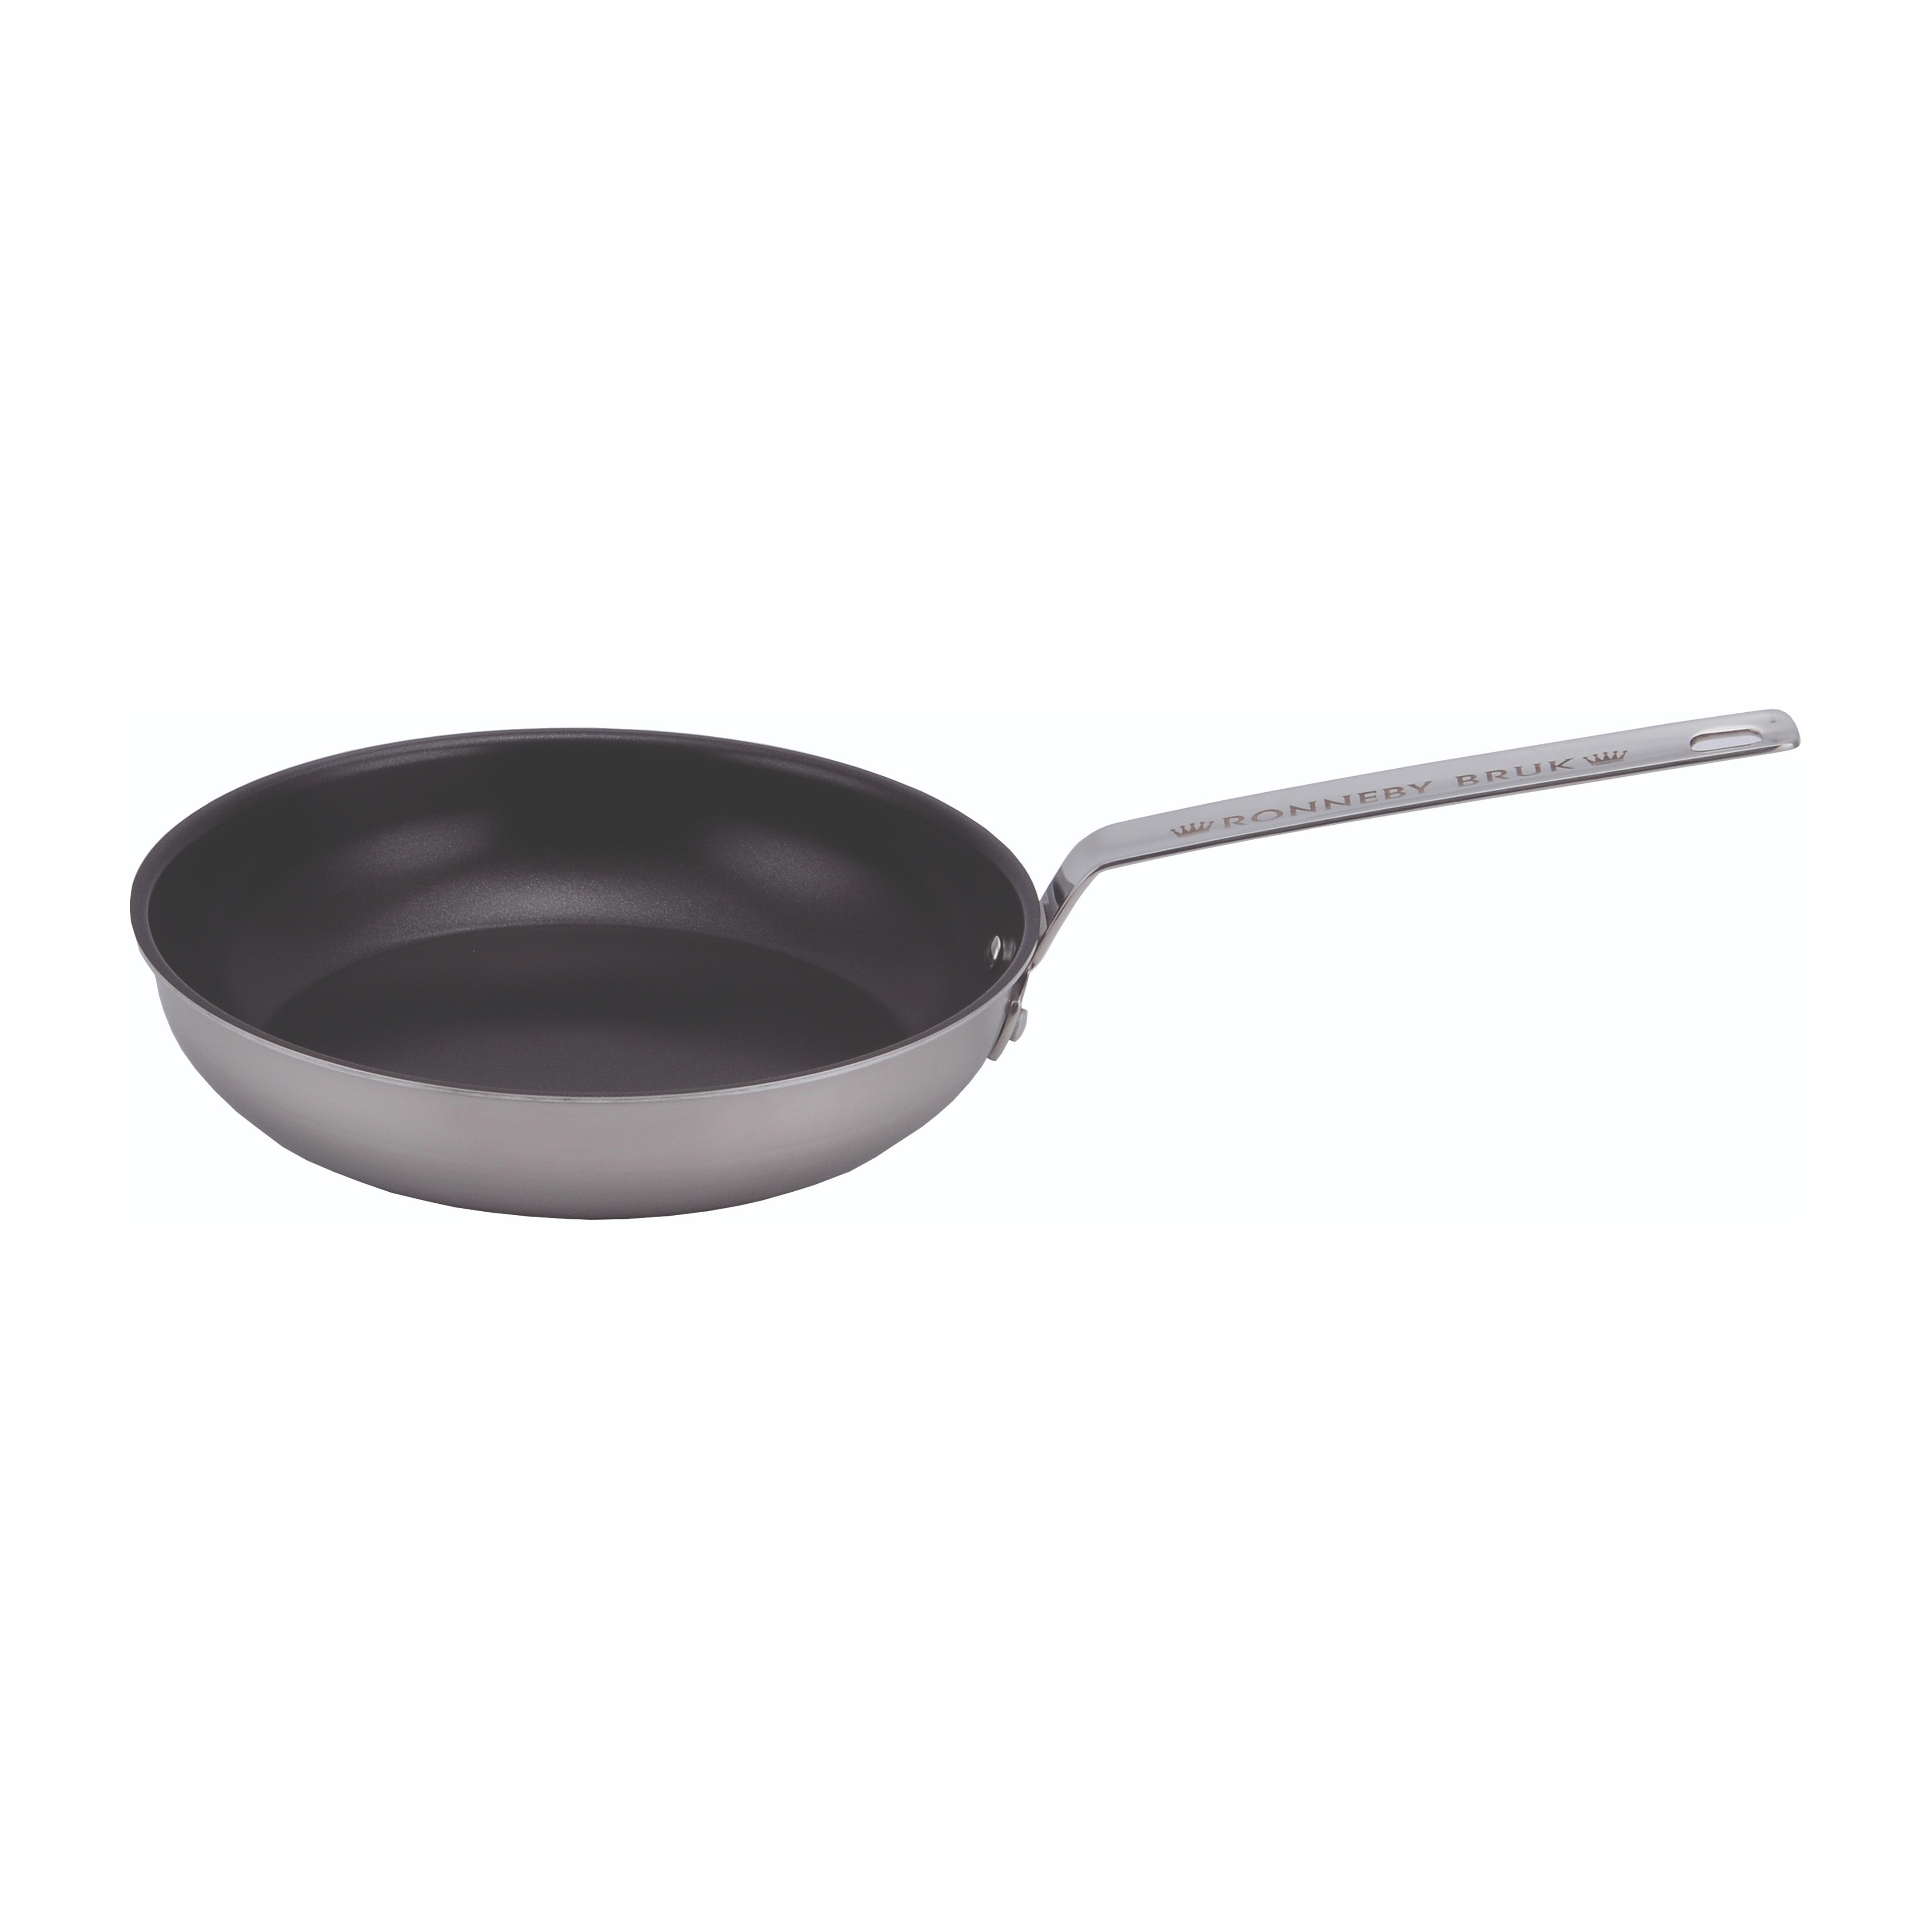 https://www.nordicnest.com/assets/blobs/ronneby-bruk-inox-frying-pan-in-stainless-steel-with-ceramic-nonstick-coating-26-cm/575278-01_1_ProductImageMain-003ff6be20.jpeg